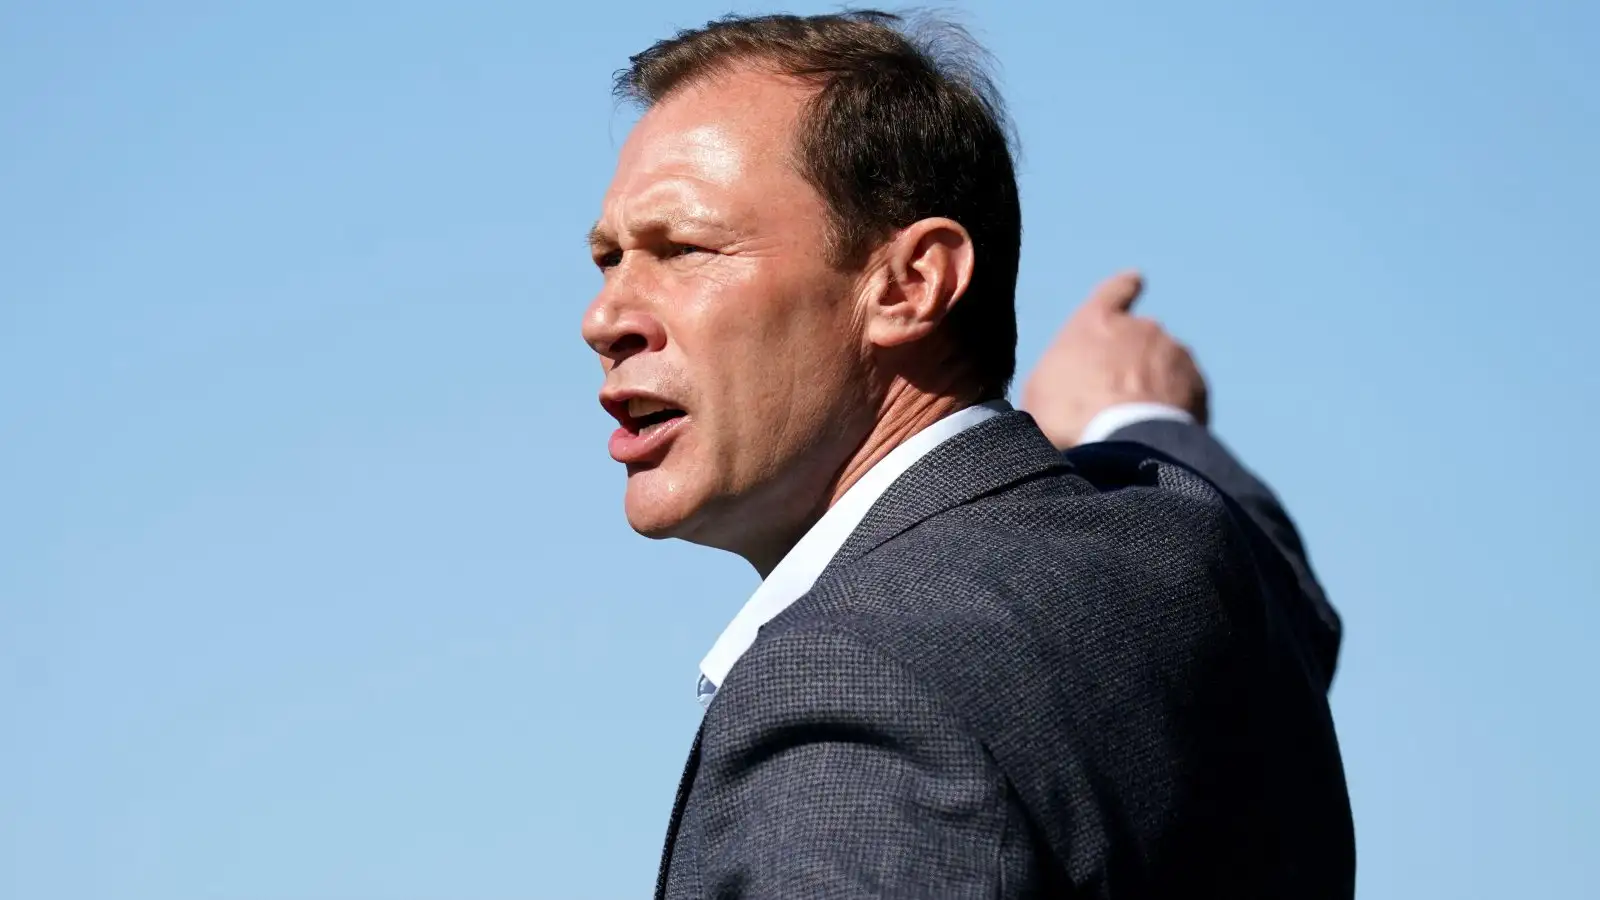 Former Everton striker Duncan Ferguson during a match in charge of Forest Green Rovers.